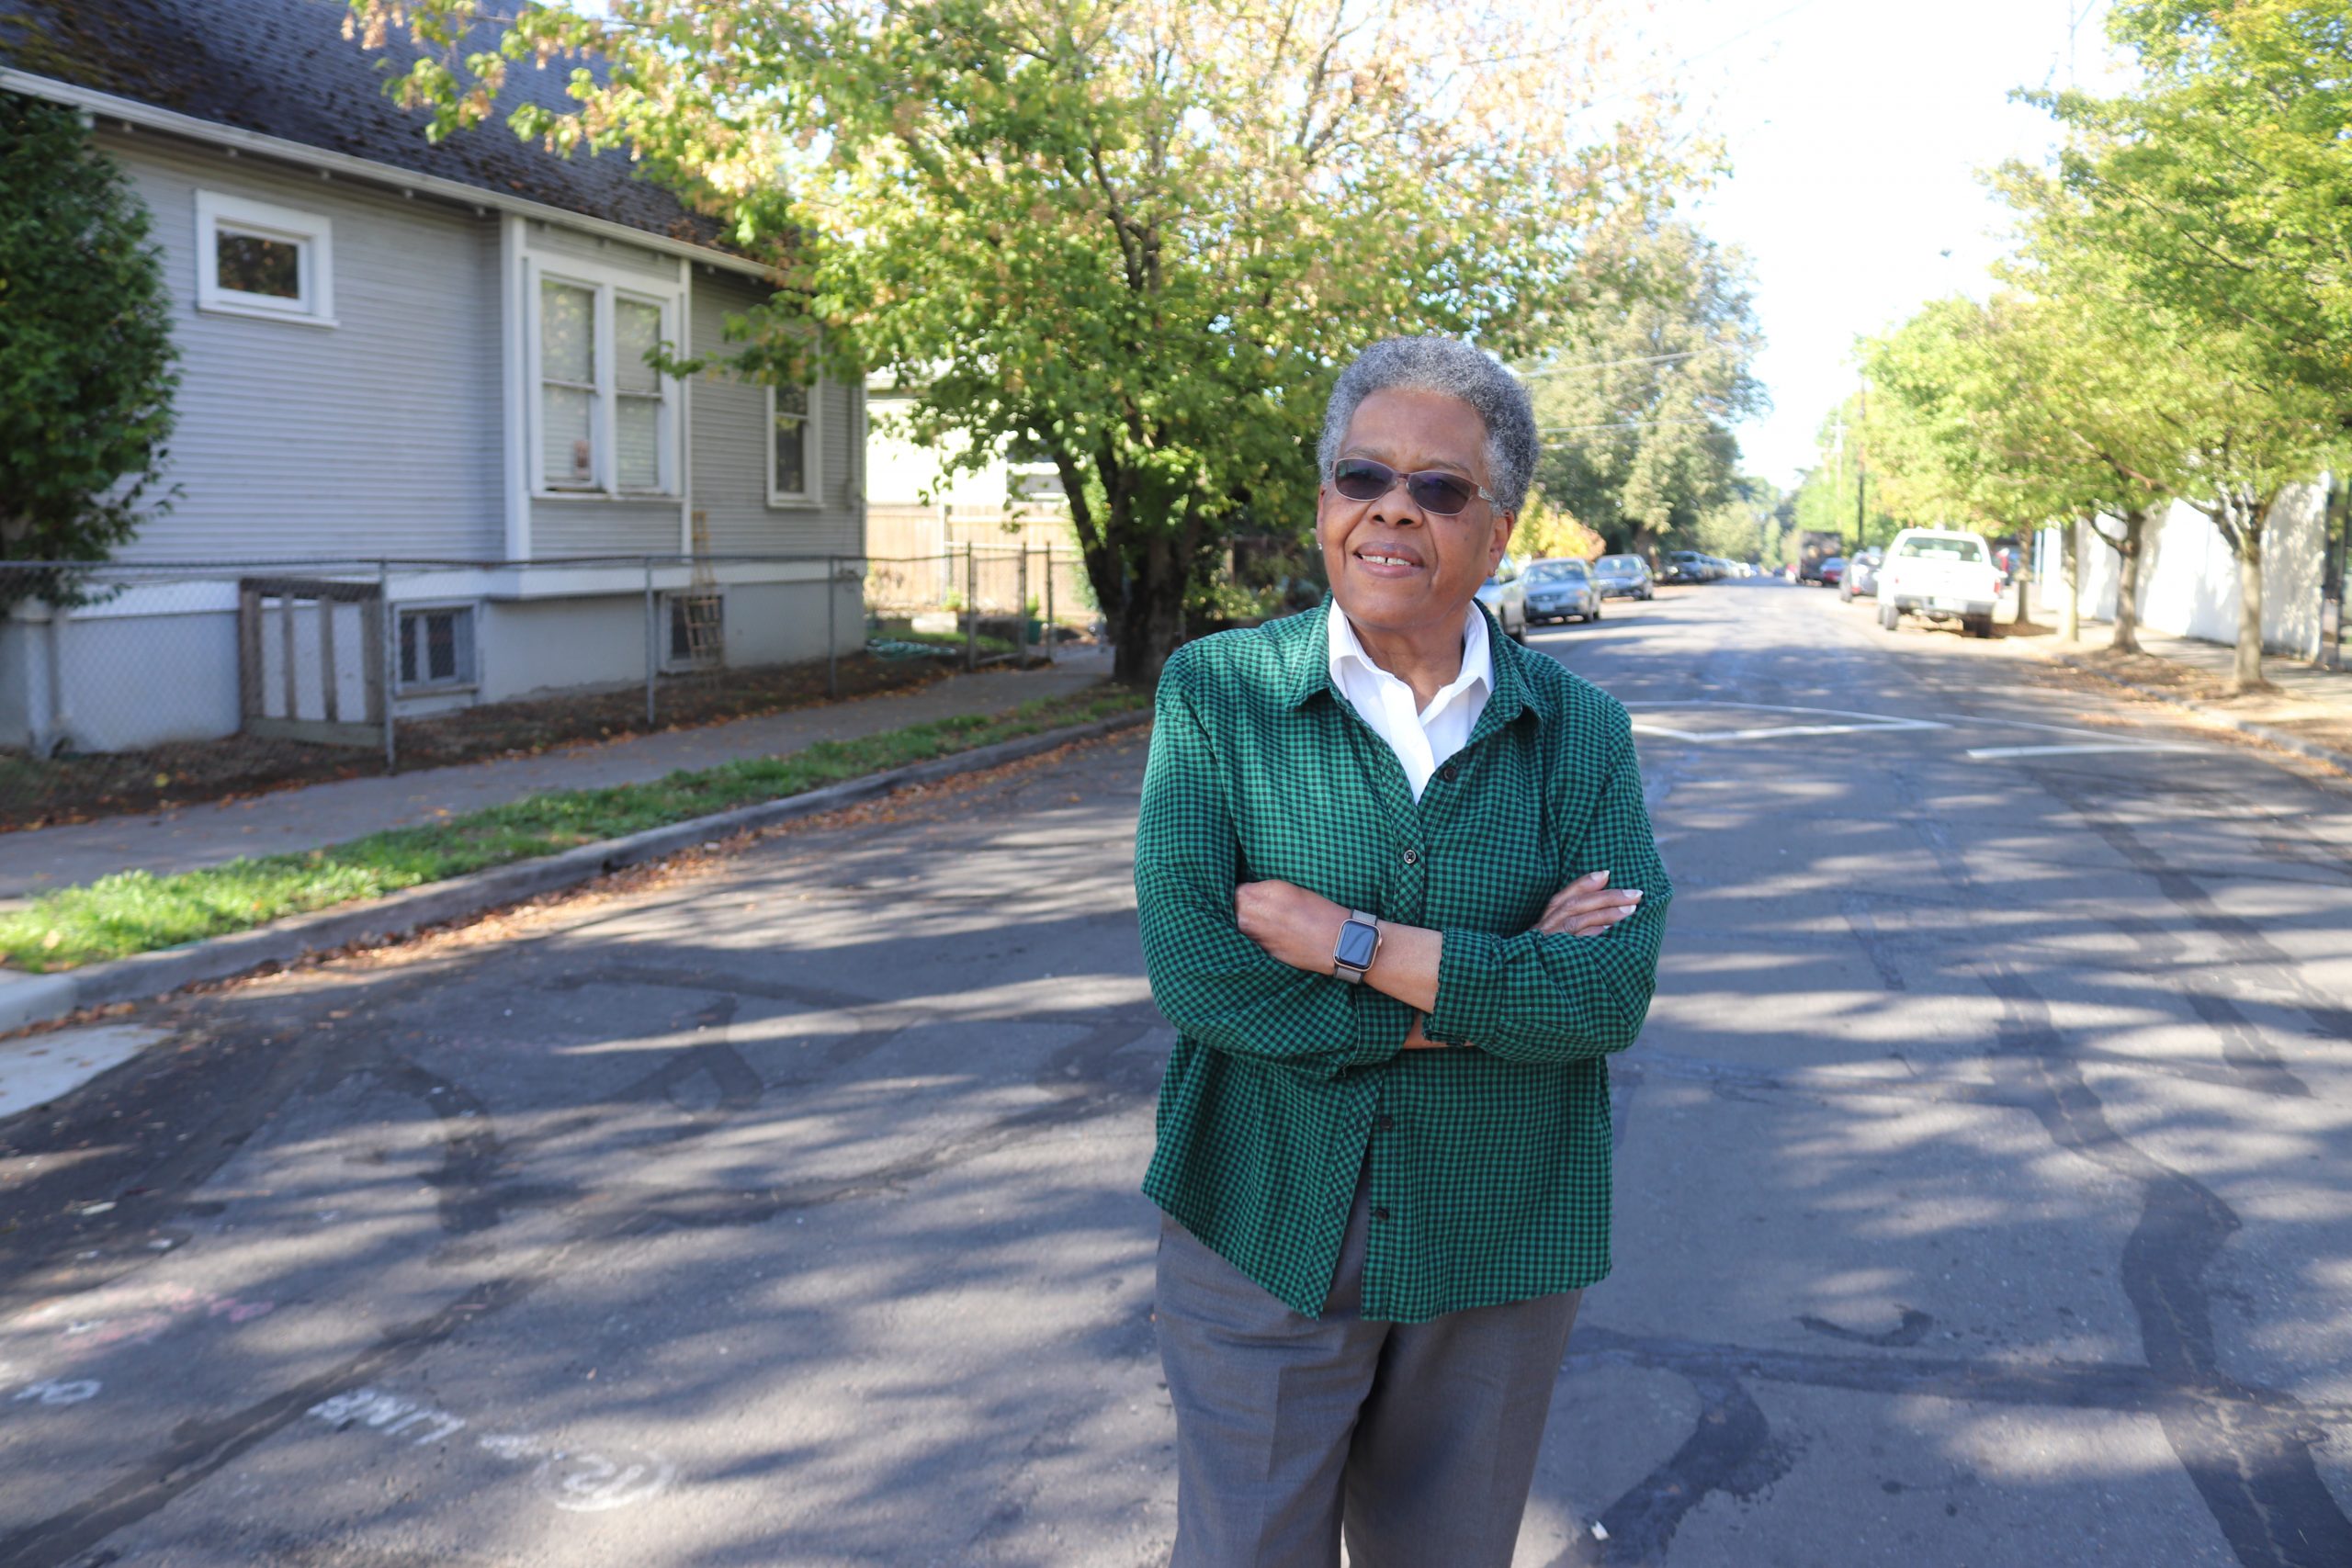 Carmen Sylvester poses in the street where she once walked the beat.